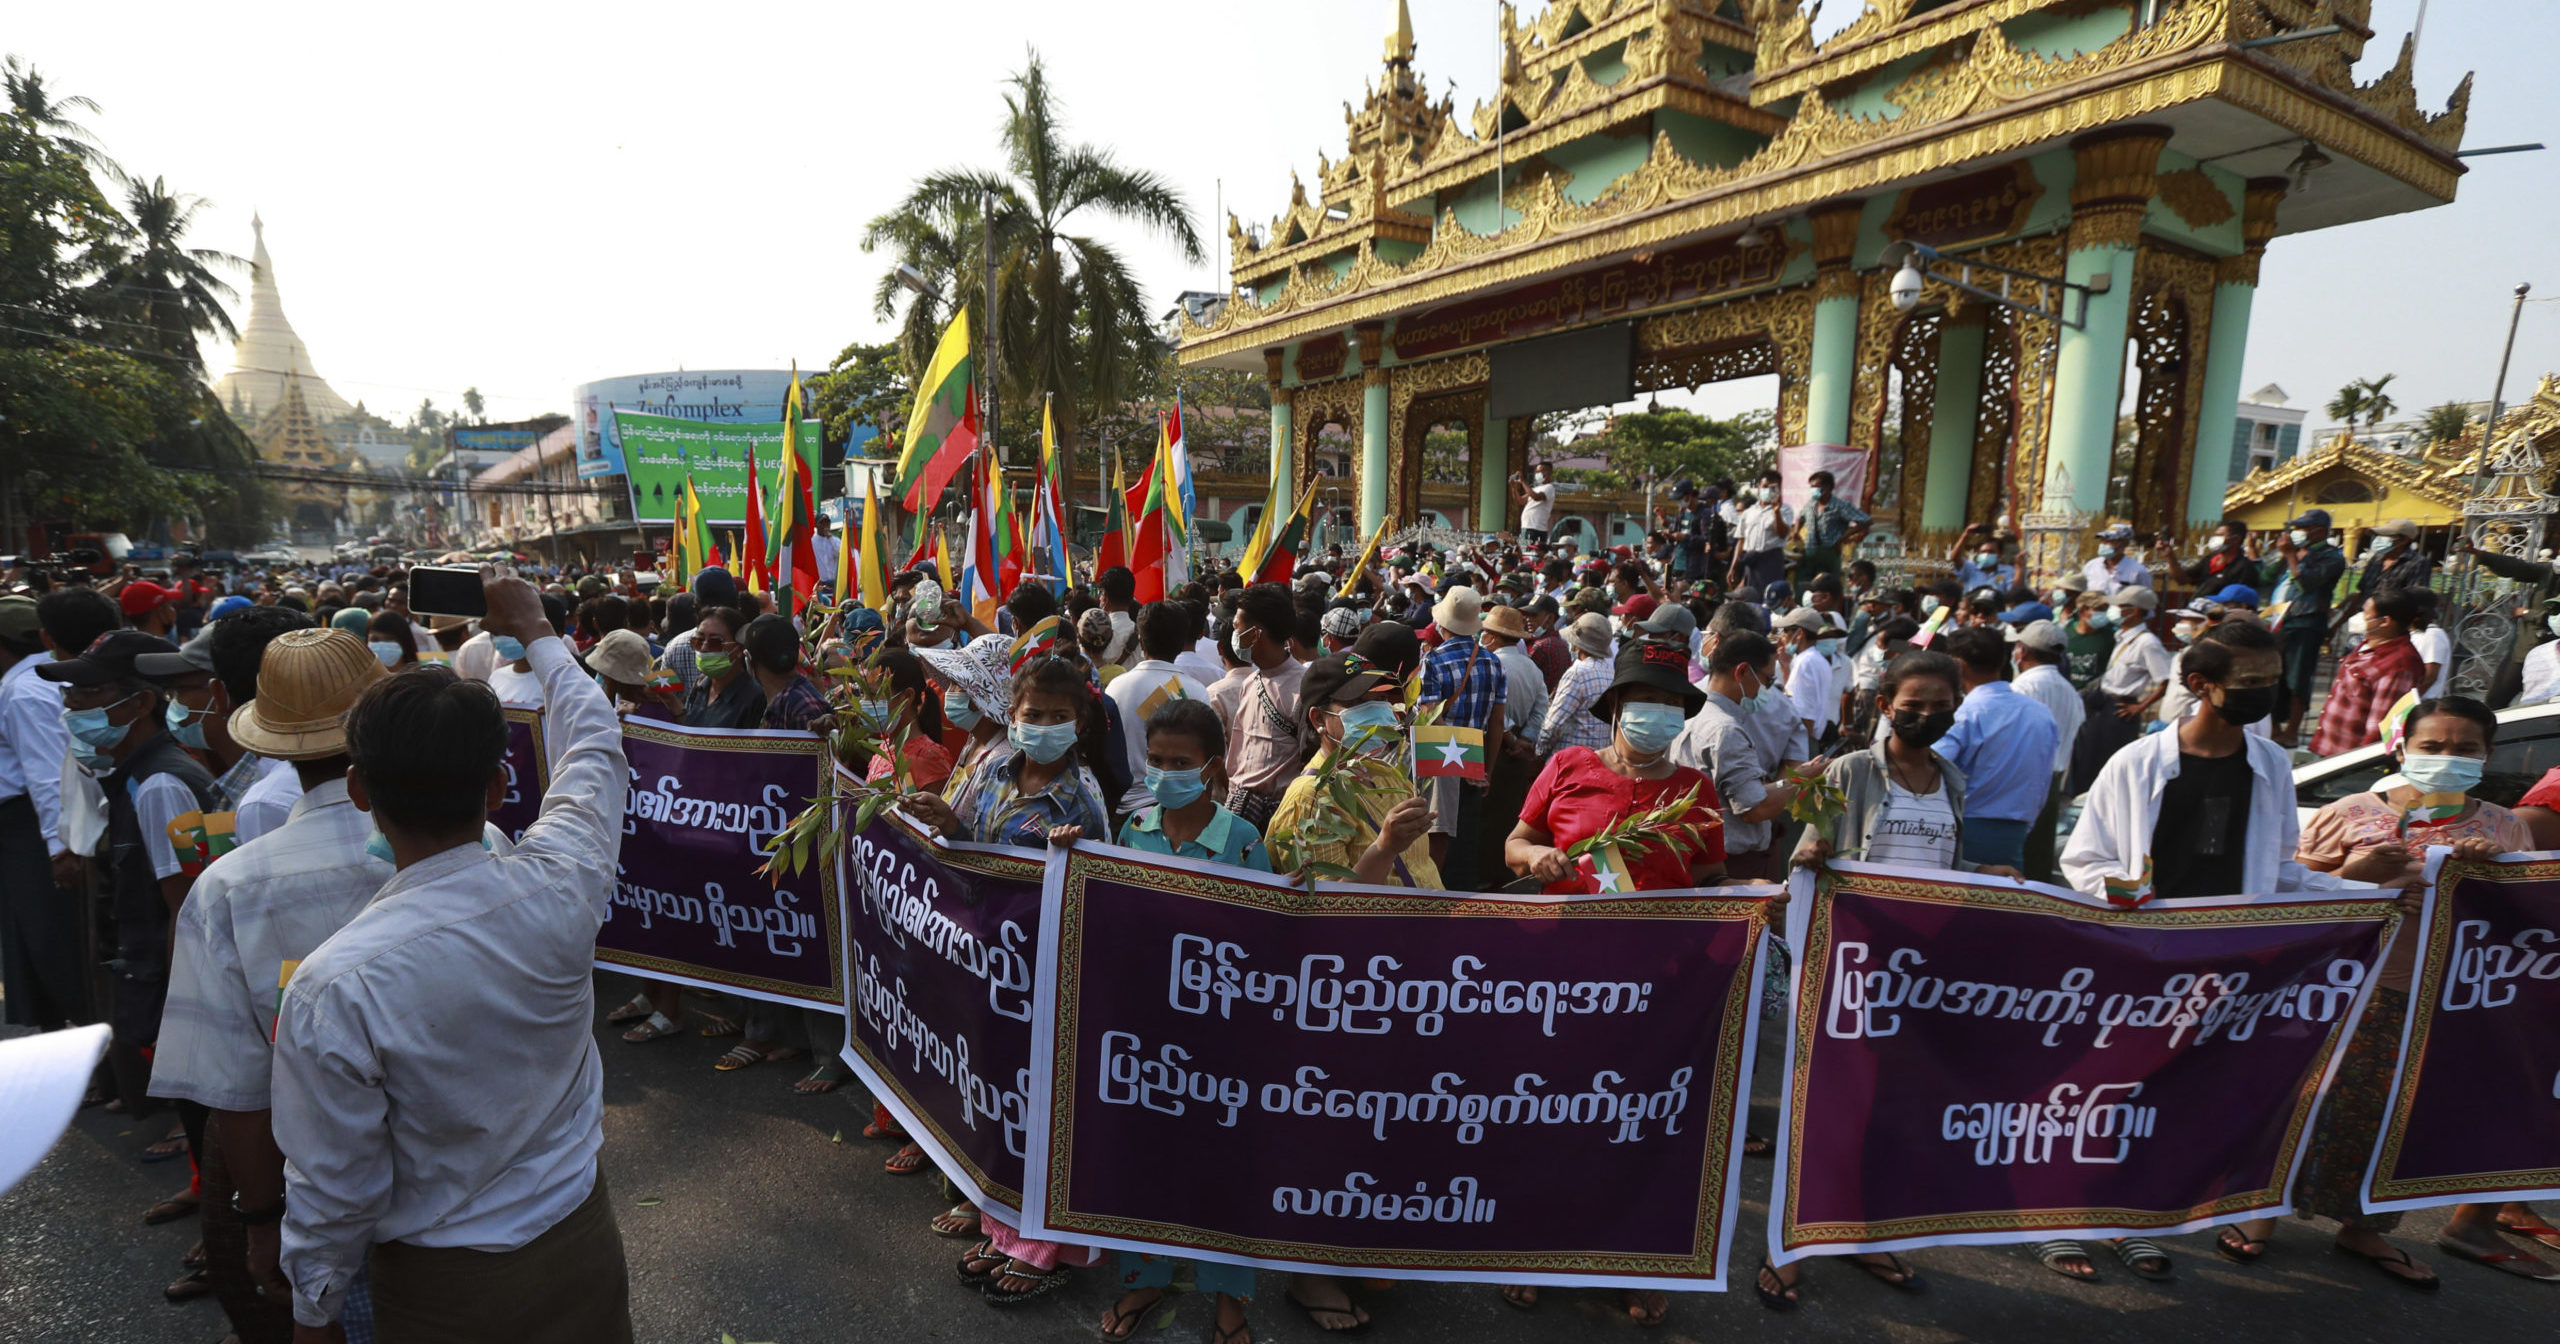 Supporters of the Myanmar military and the military-backed Union Solidarity and Development Party hold placards that read, "Do not accept interference by foreign countries. Wipe out those relying on external elements," as they protest election results during a rally near Shwedagon pagoda in Yangon on Saturday.